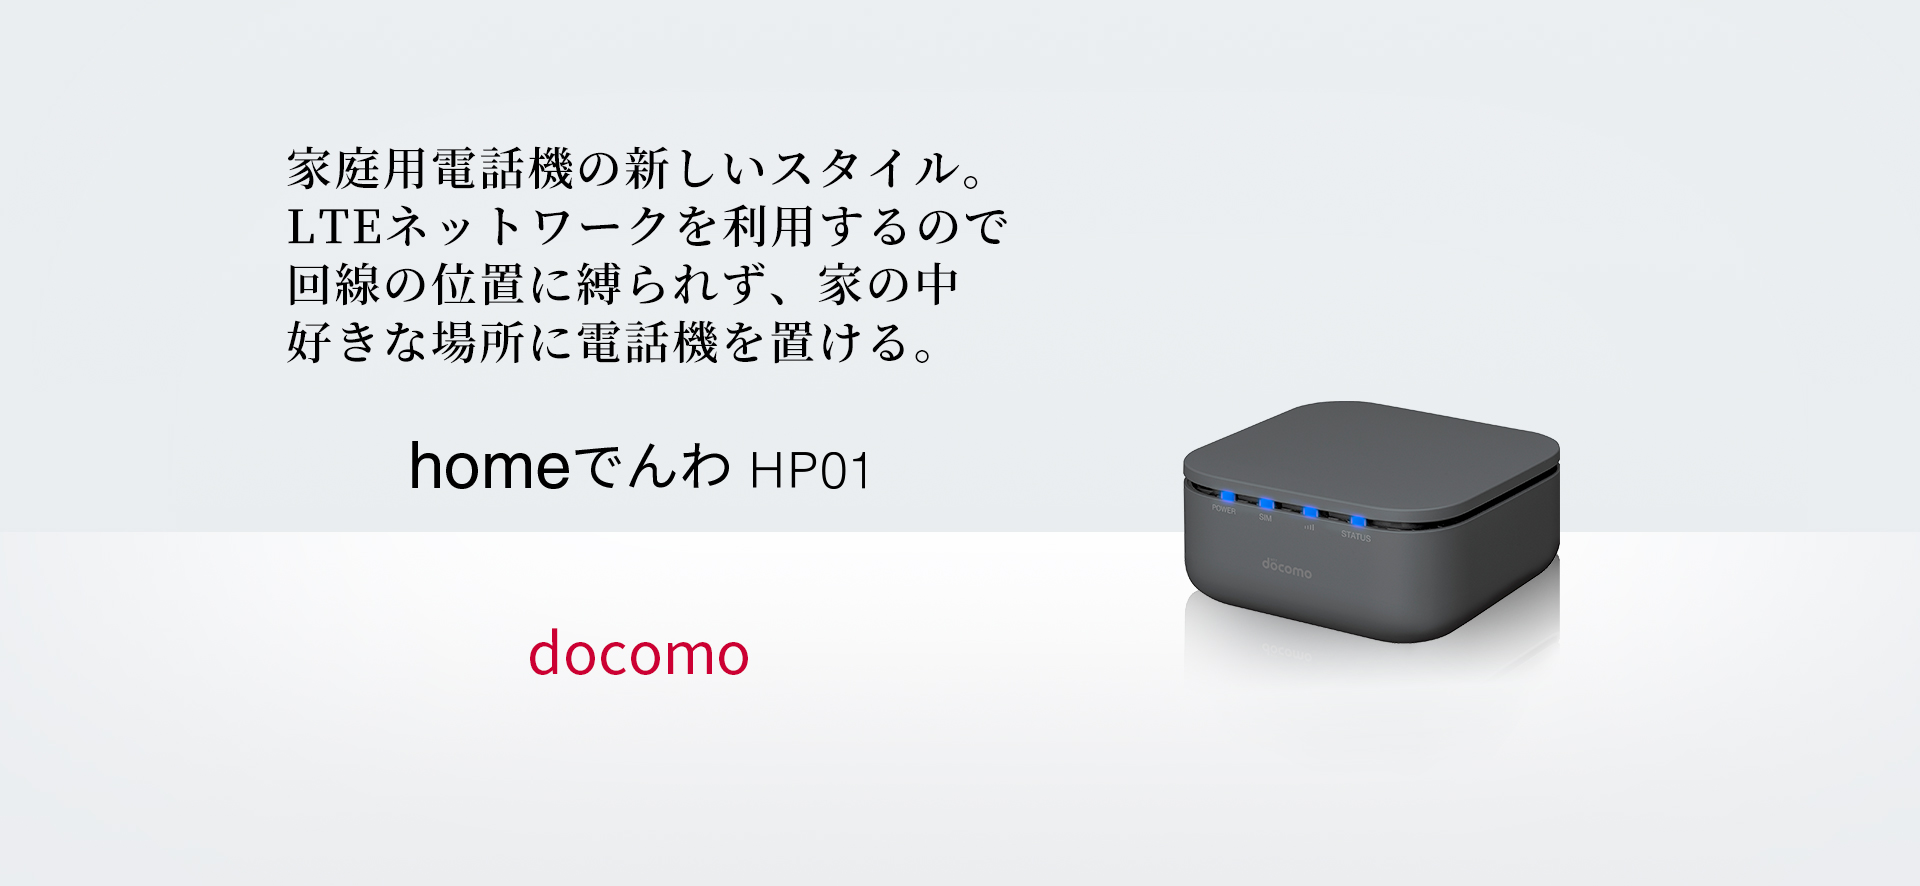 homeでんわ HP01